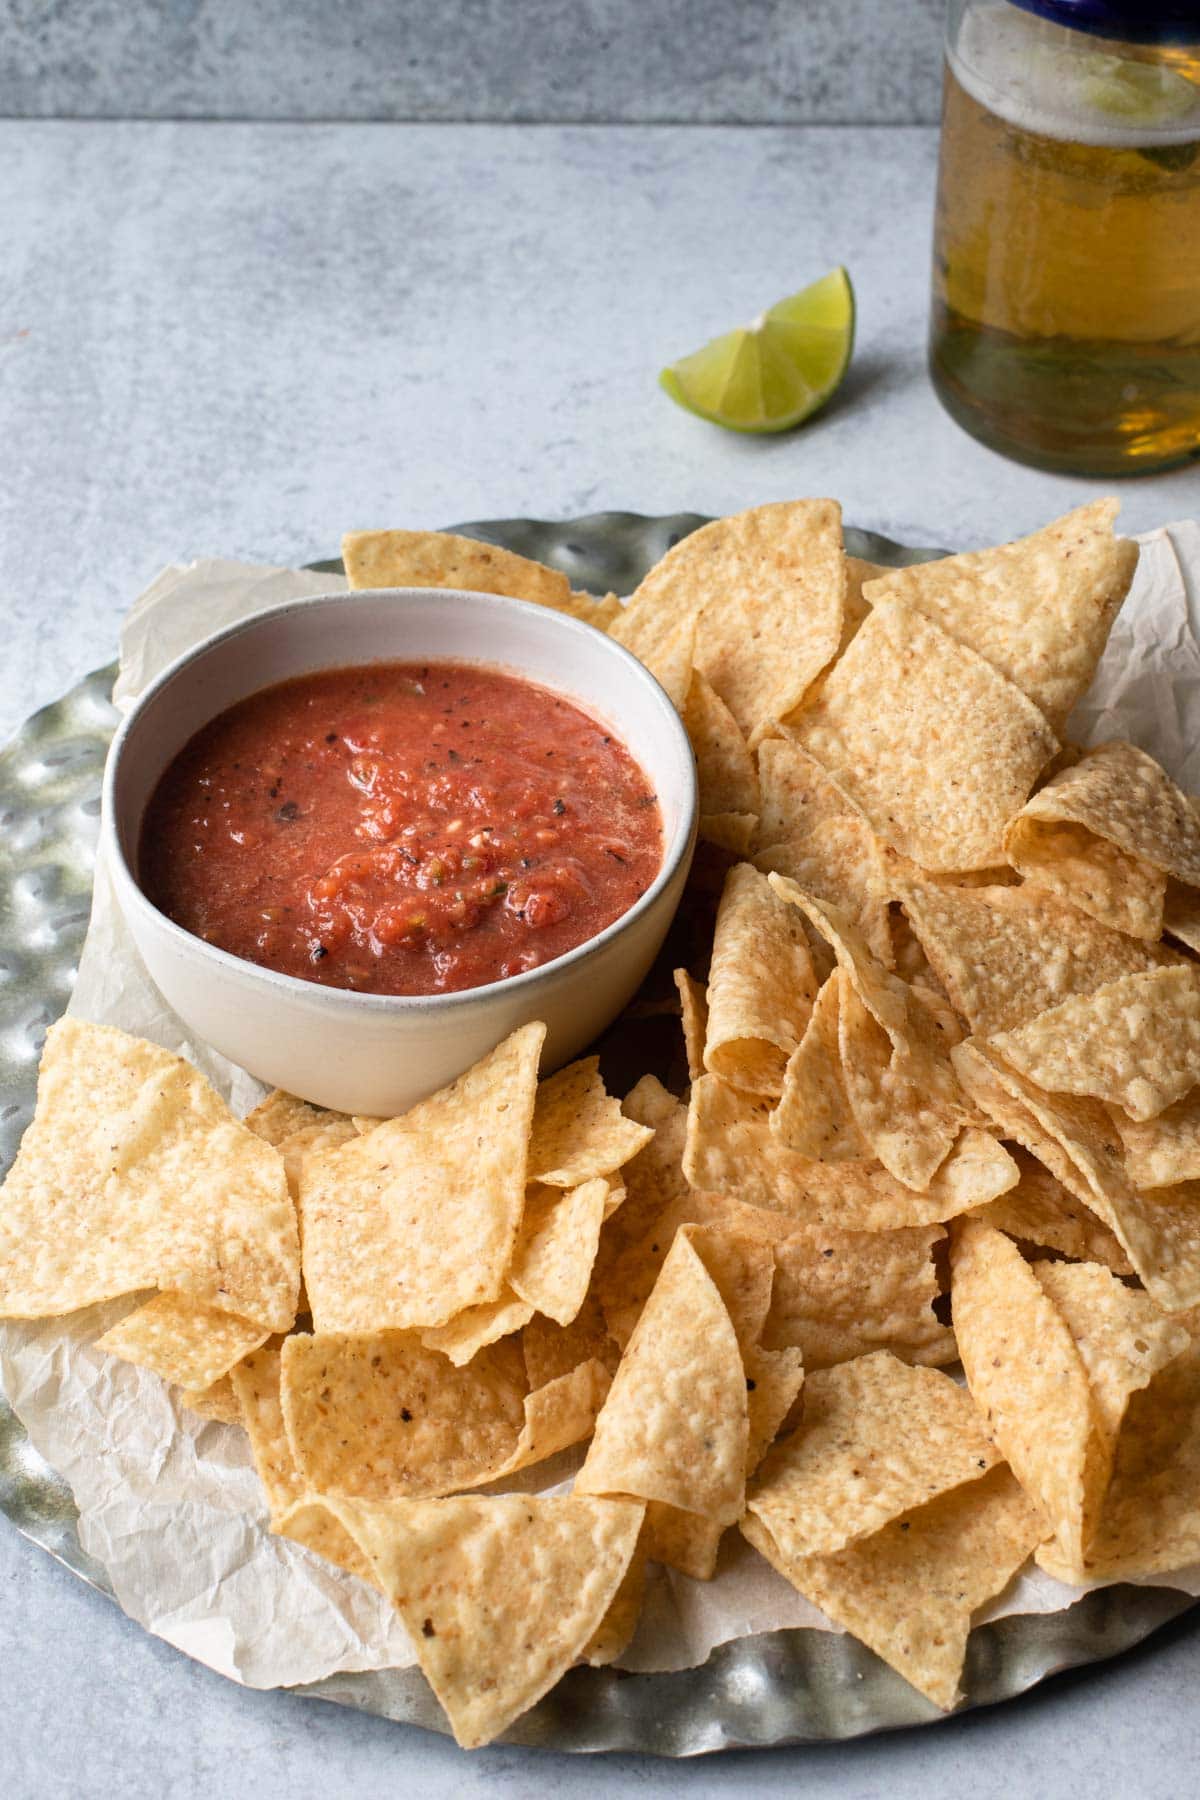 bowl of red salsa surrounded by tortilla chips